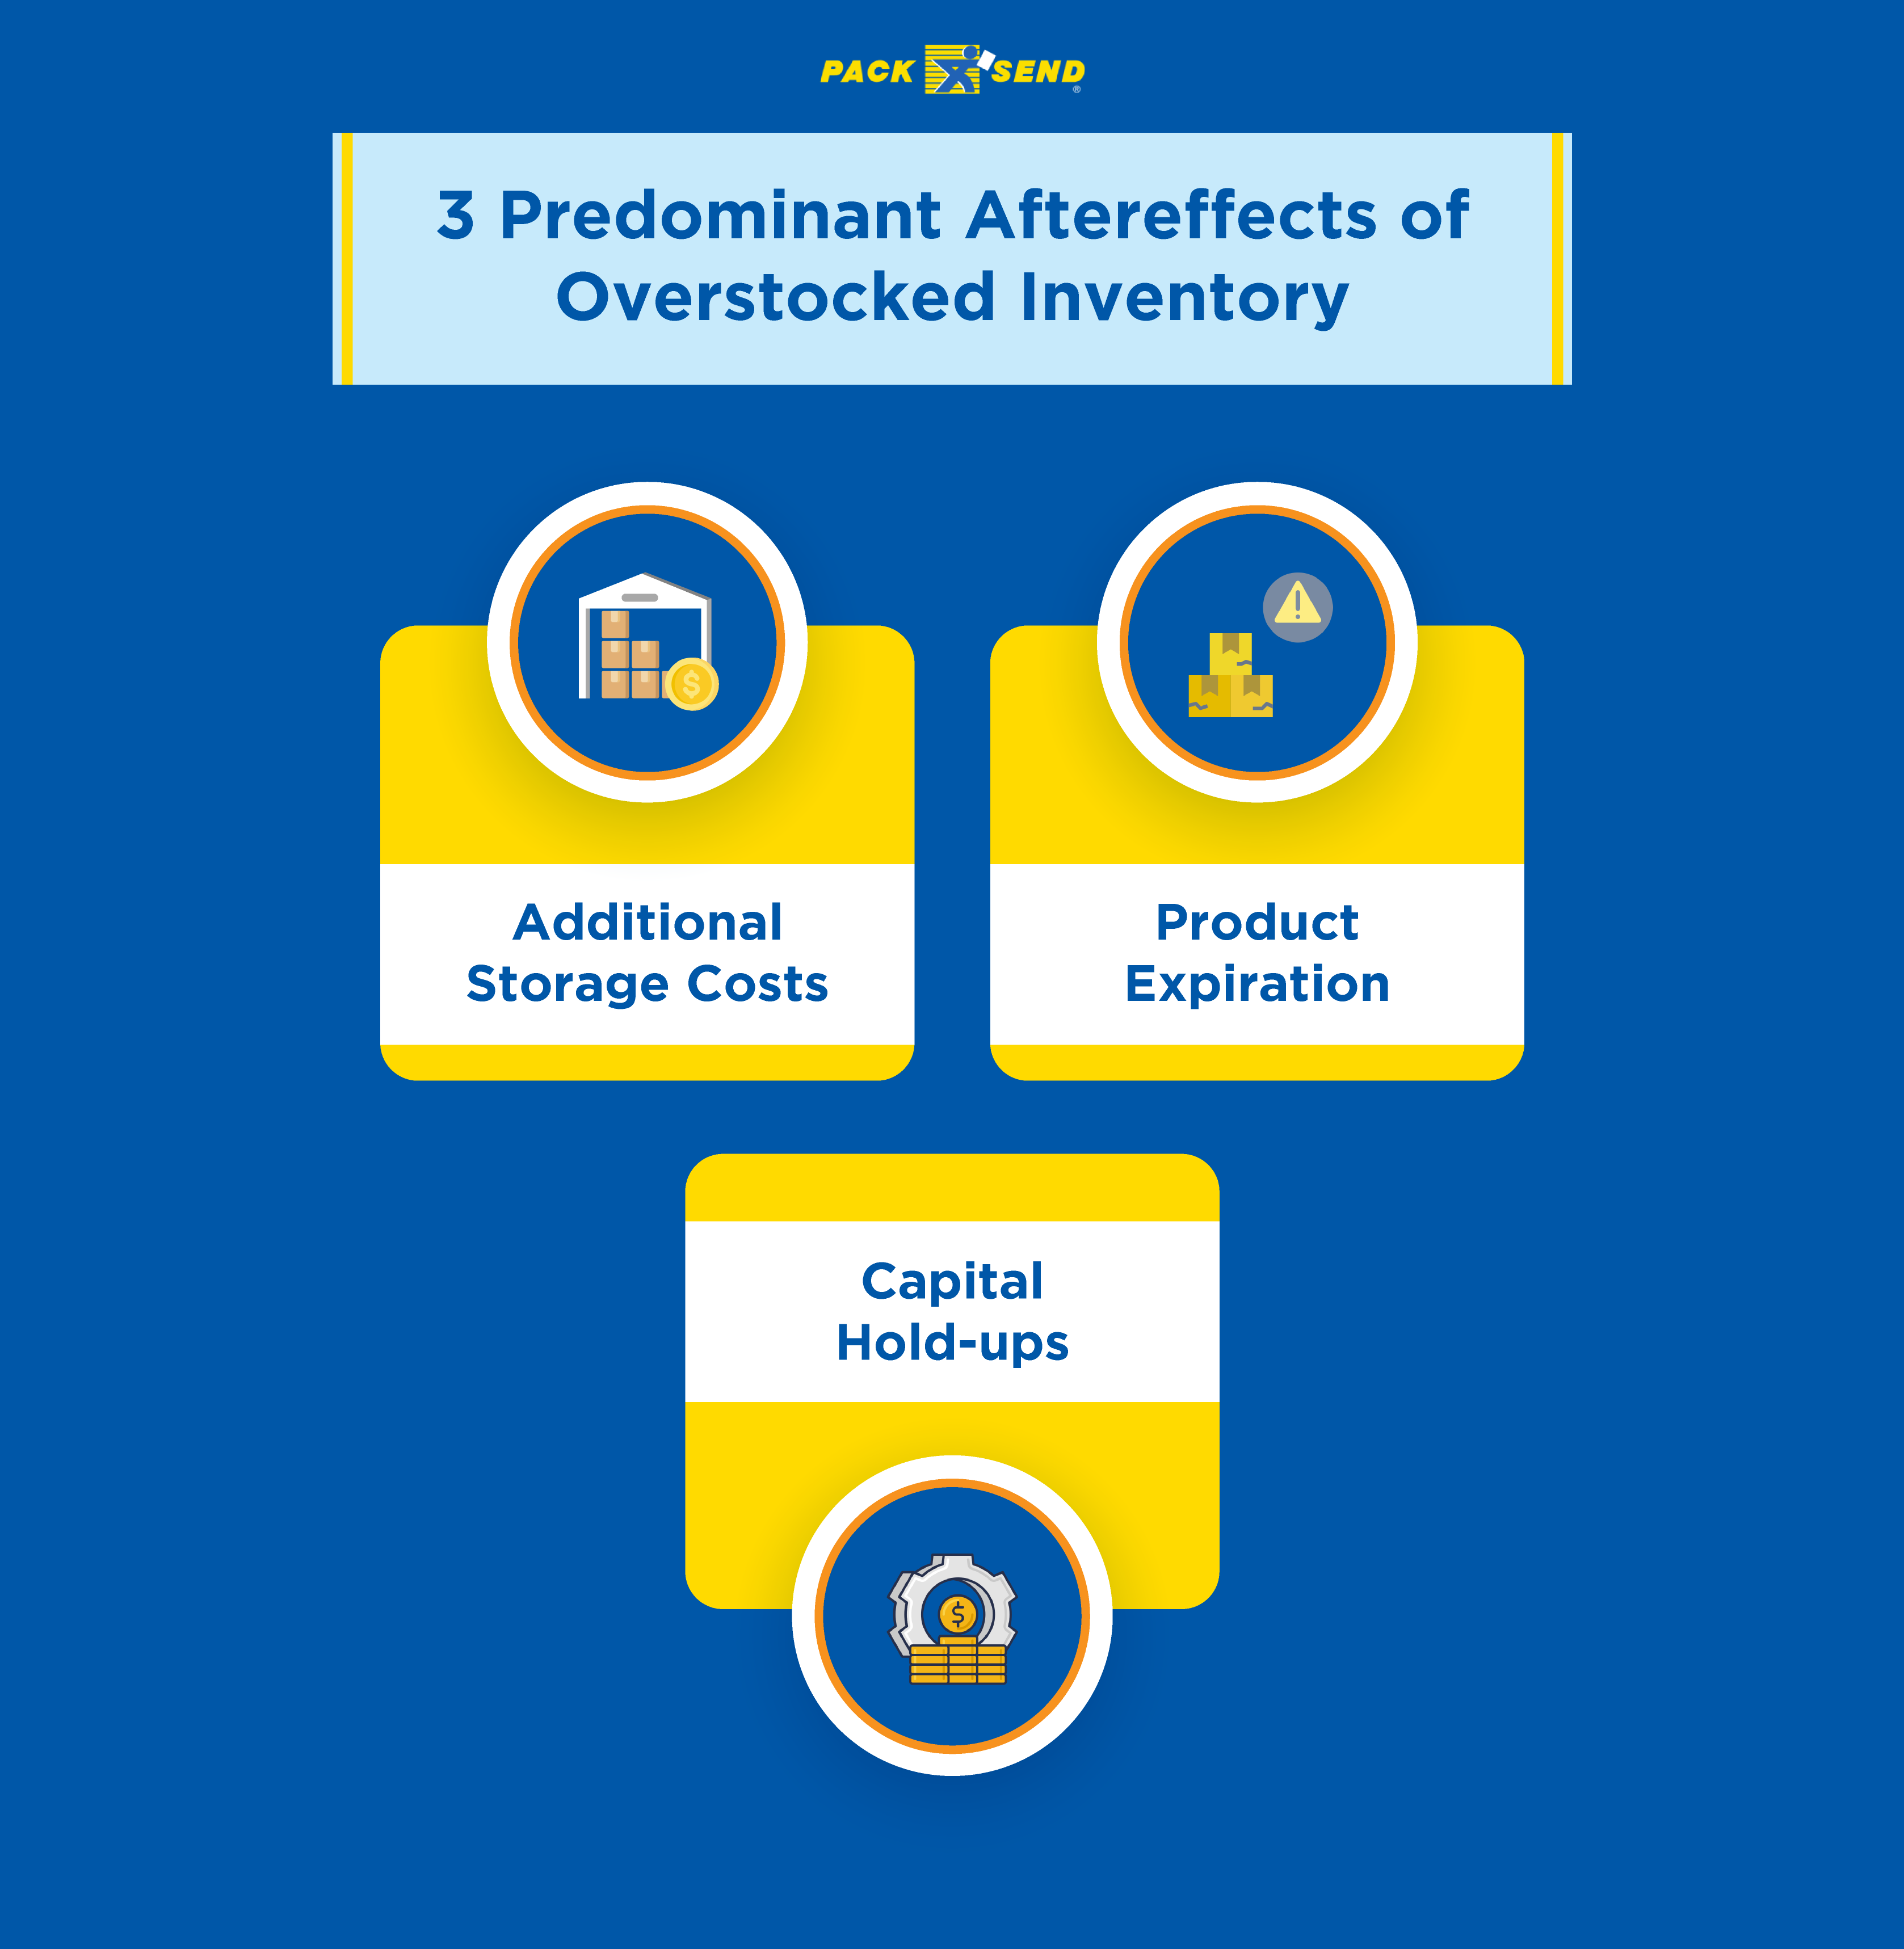 Overstocking leads to additional storage costs, product expiration and capital hold-ups.